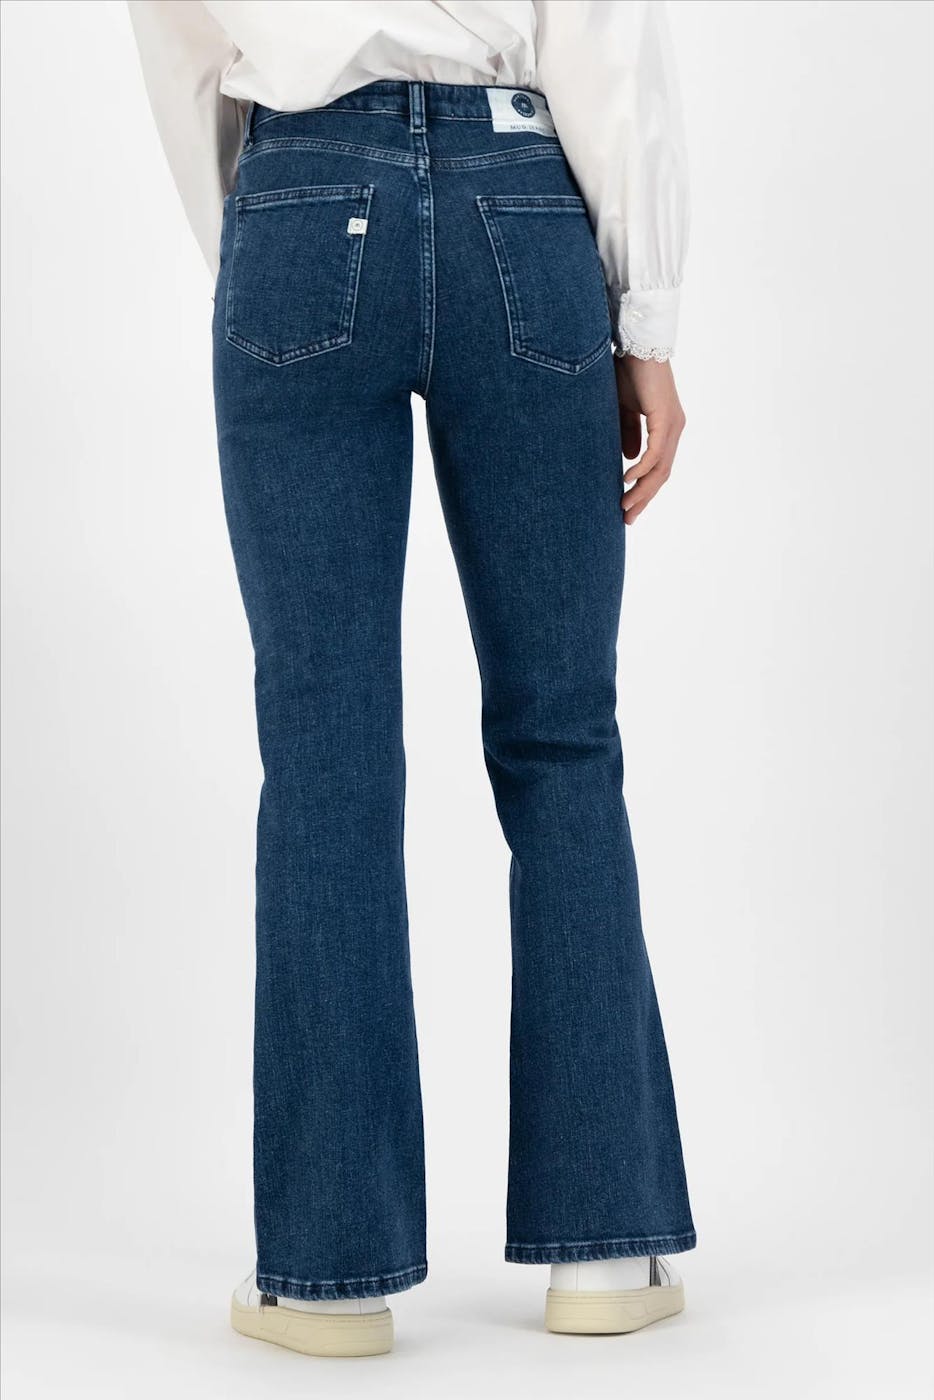 MUD jeans - Donkerblauwe Isy Flared jeans